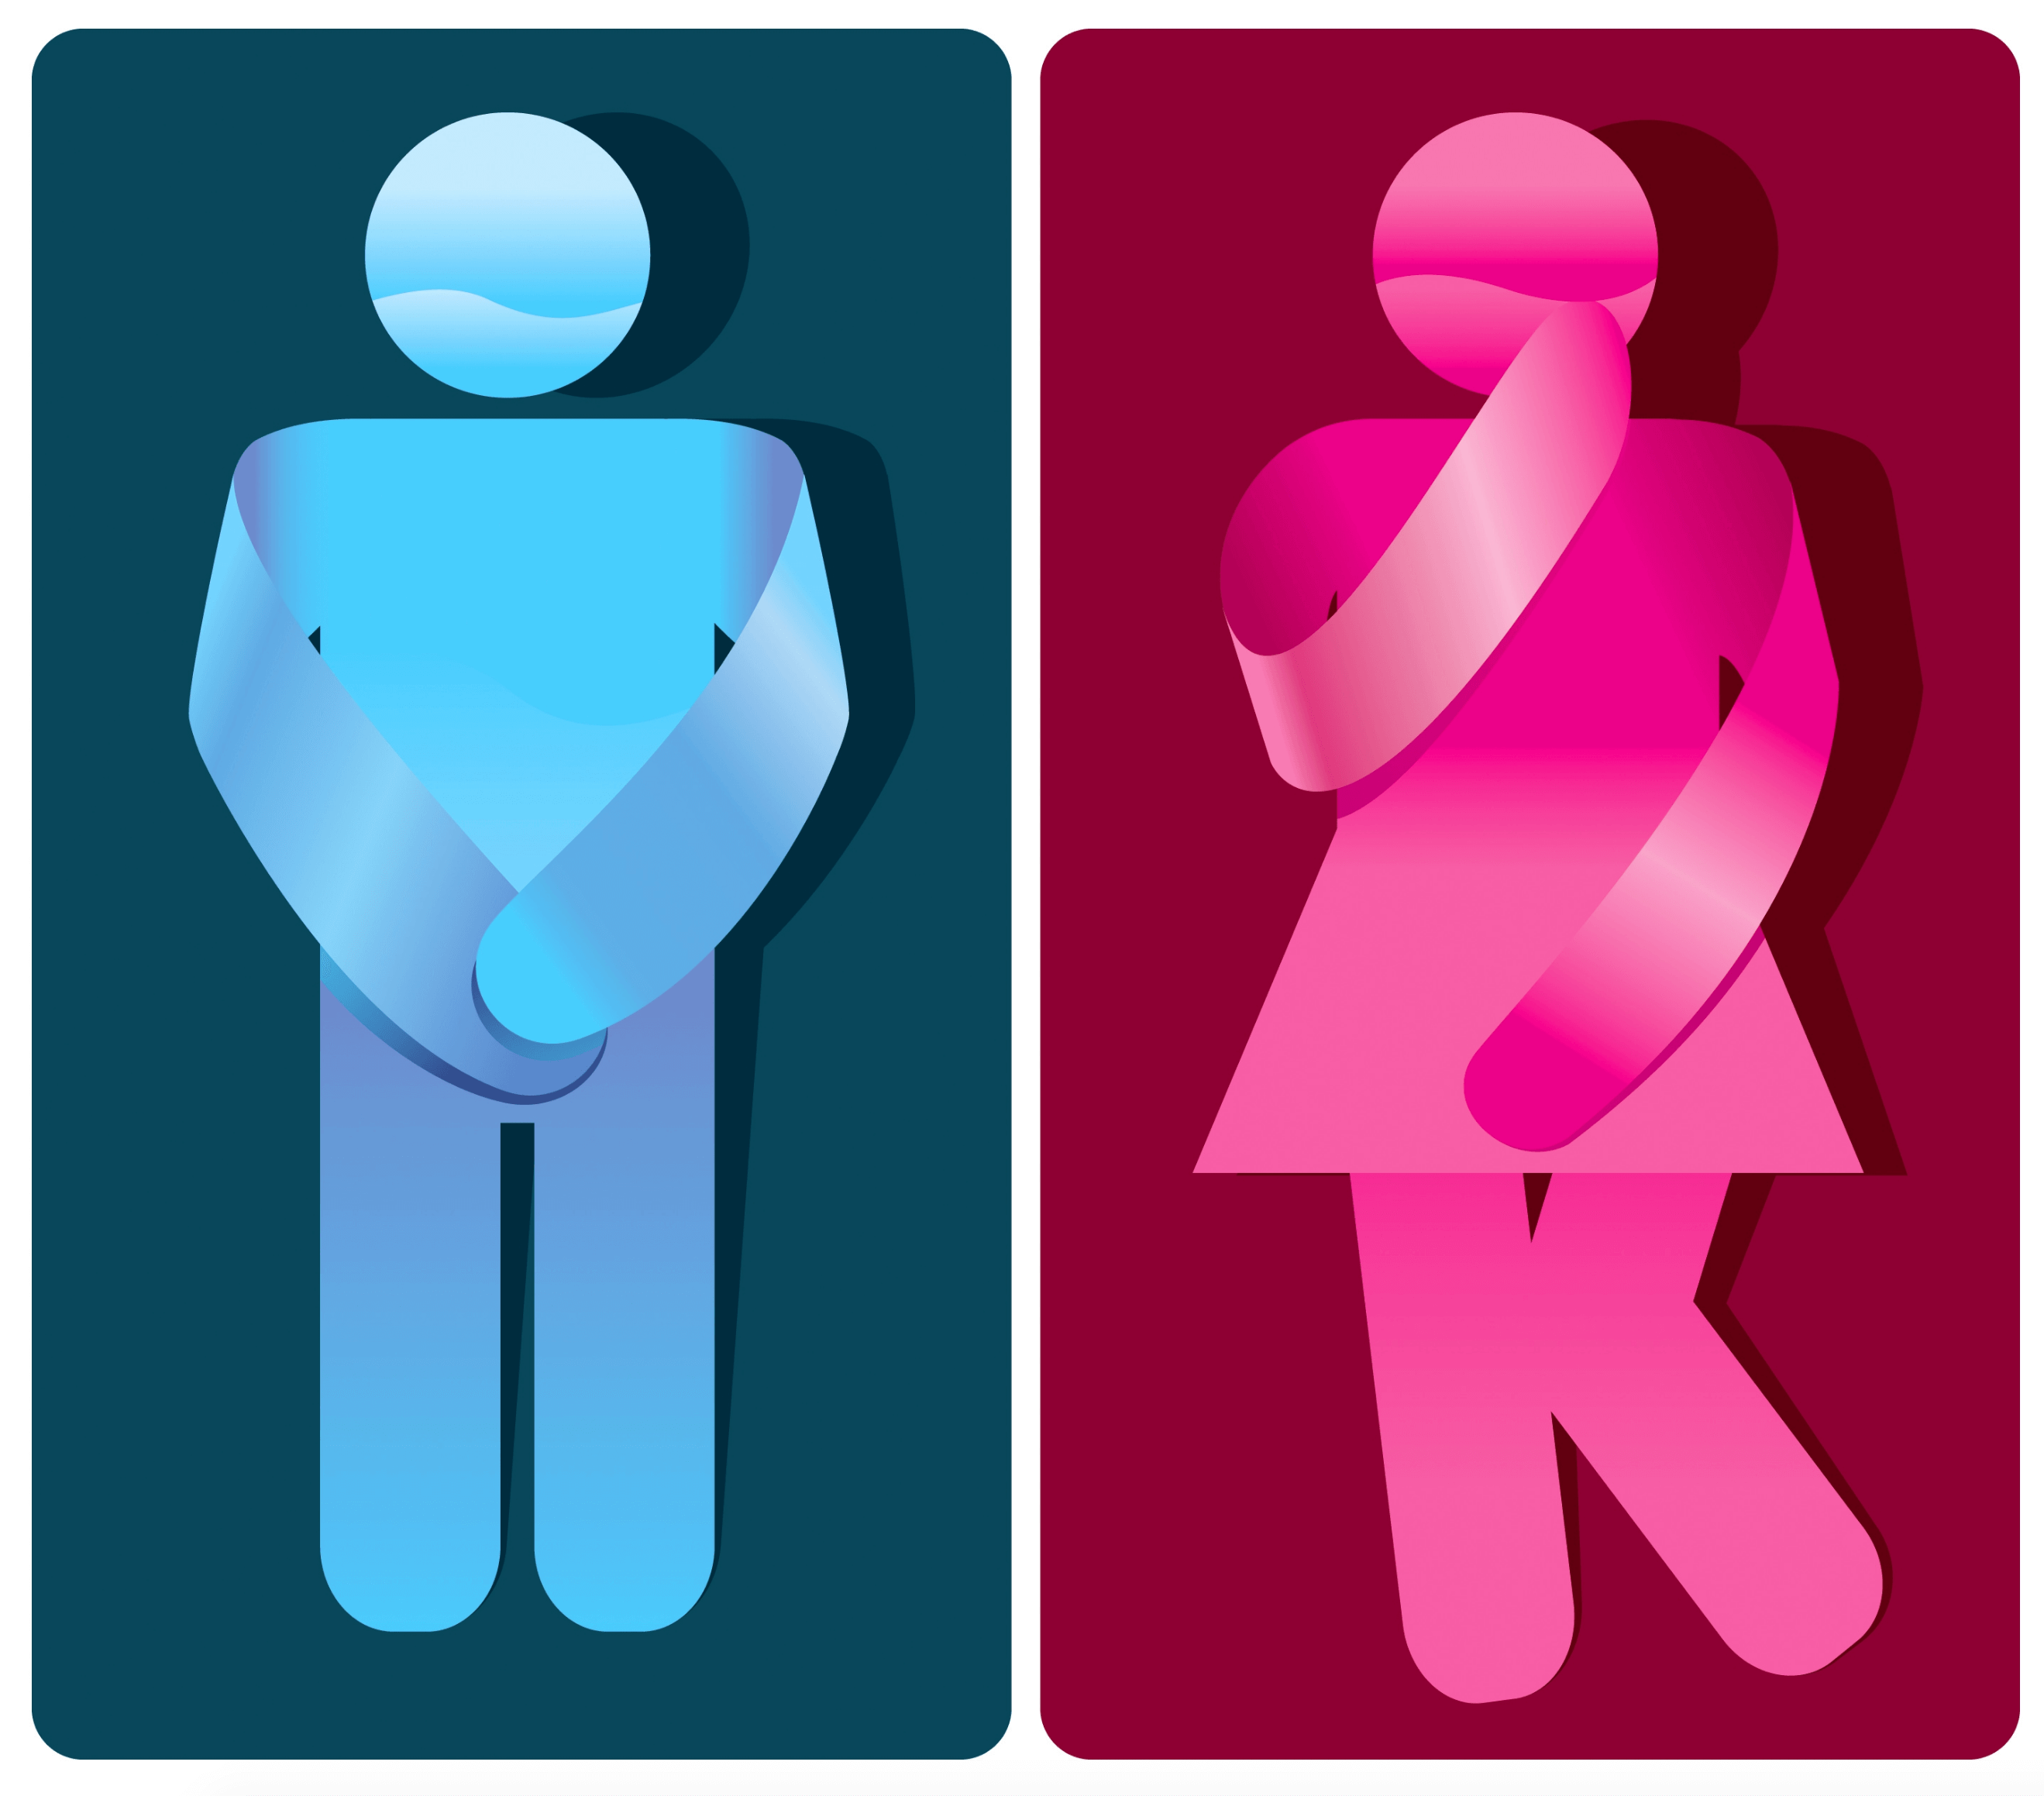 Urinary incontinence is defines as involuntary loss of urine, which is a social or hygienic problem.